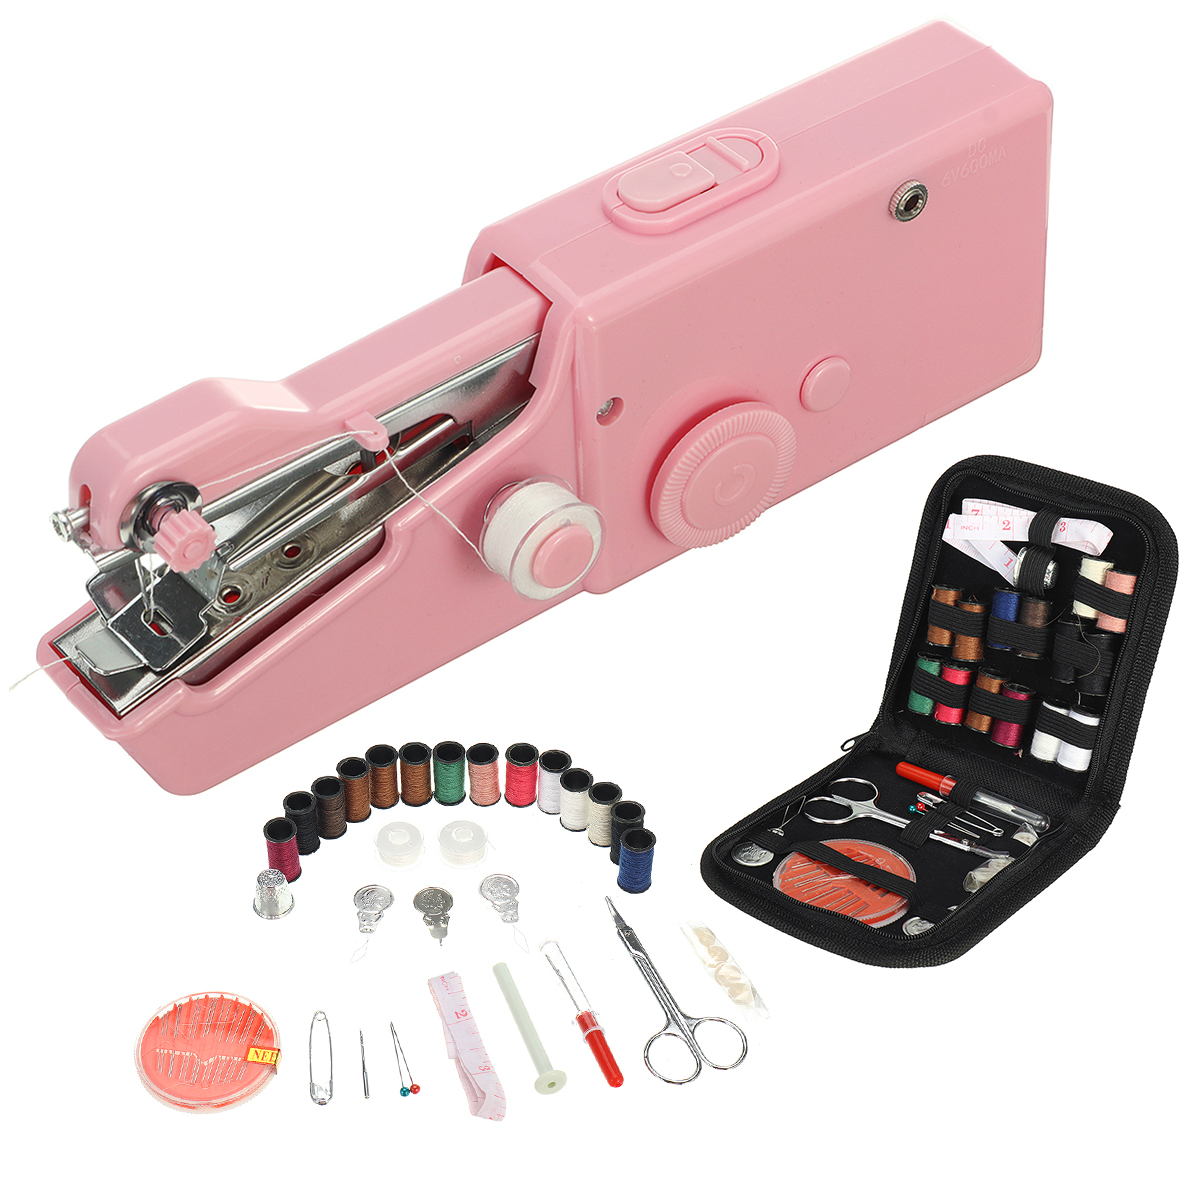 Without-Battery-Hand-held-Electric-Sewing-Set-PinkBlackWhite-Hand-held-Sewing-Machine-1890507-1